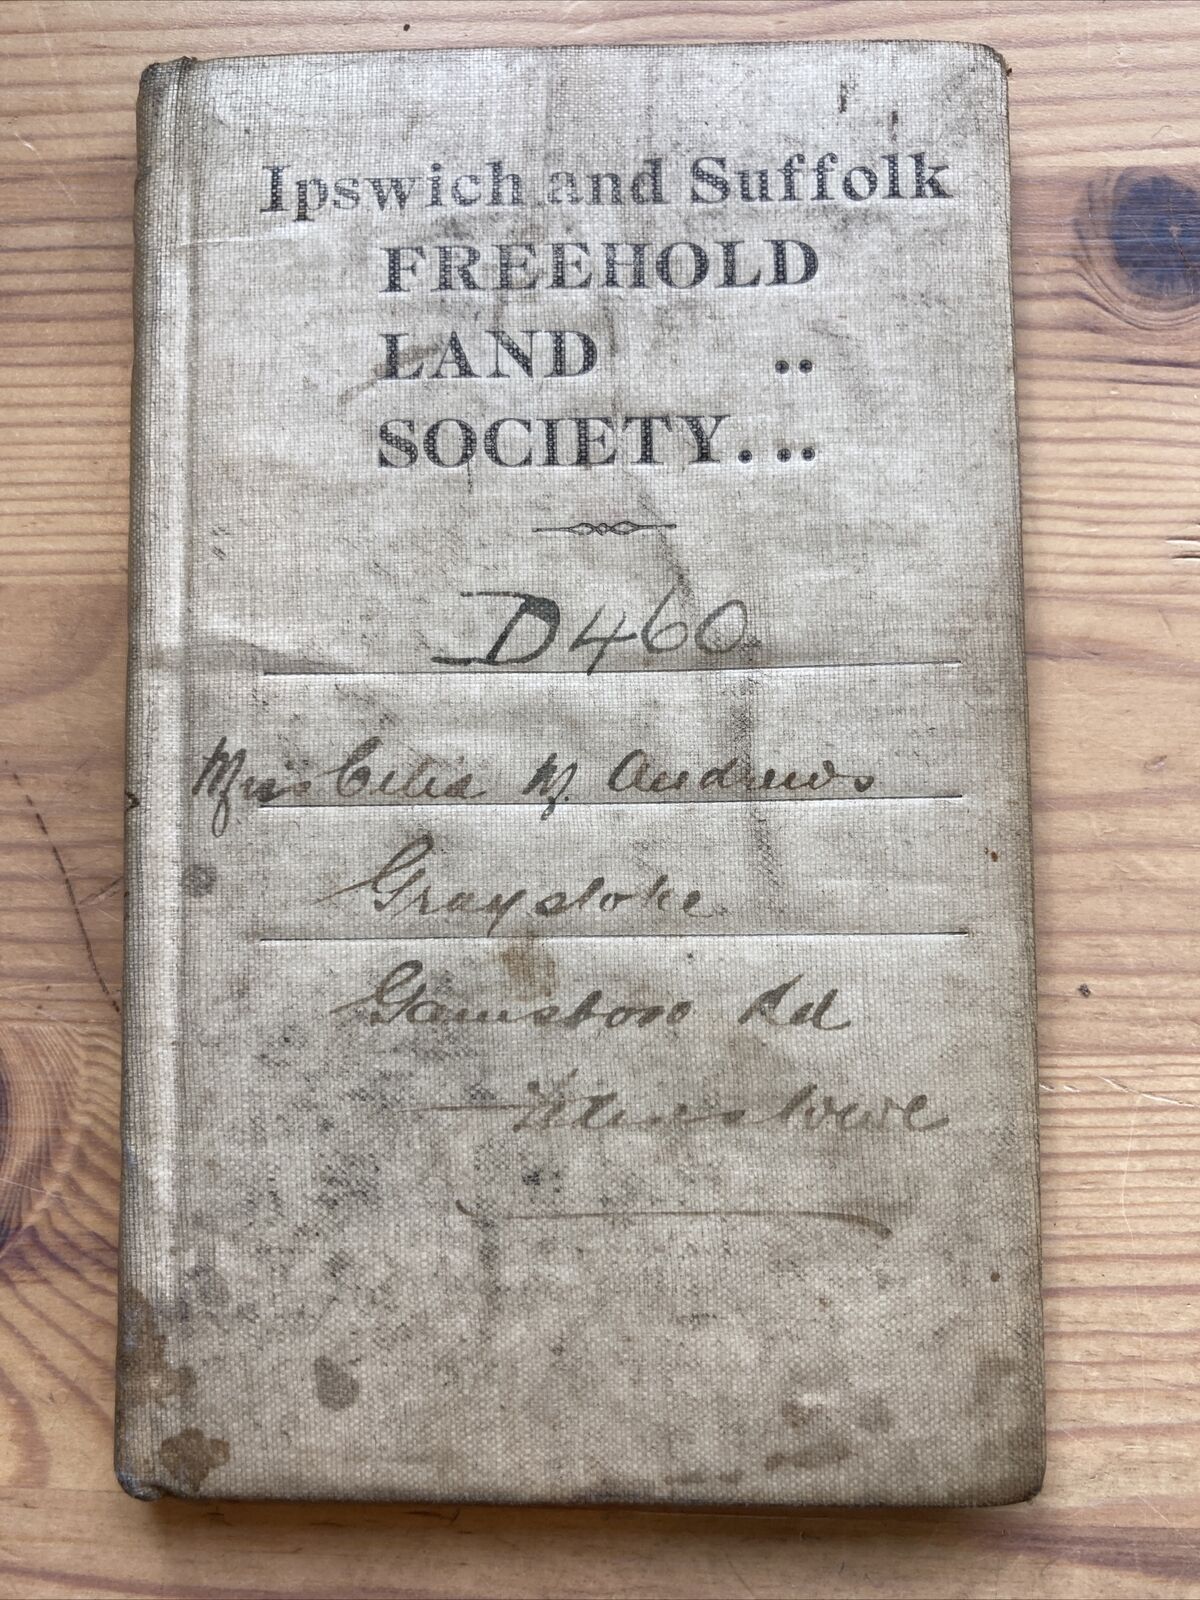 c. 1911 Ipswich & Suffolk Freehold Land Society Bank / Notebook To Celia Andrews